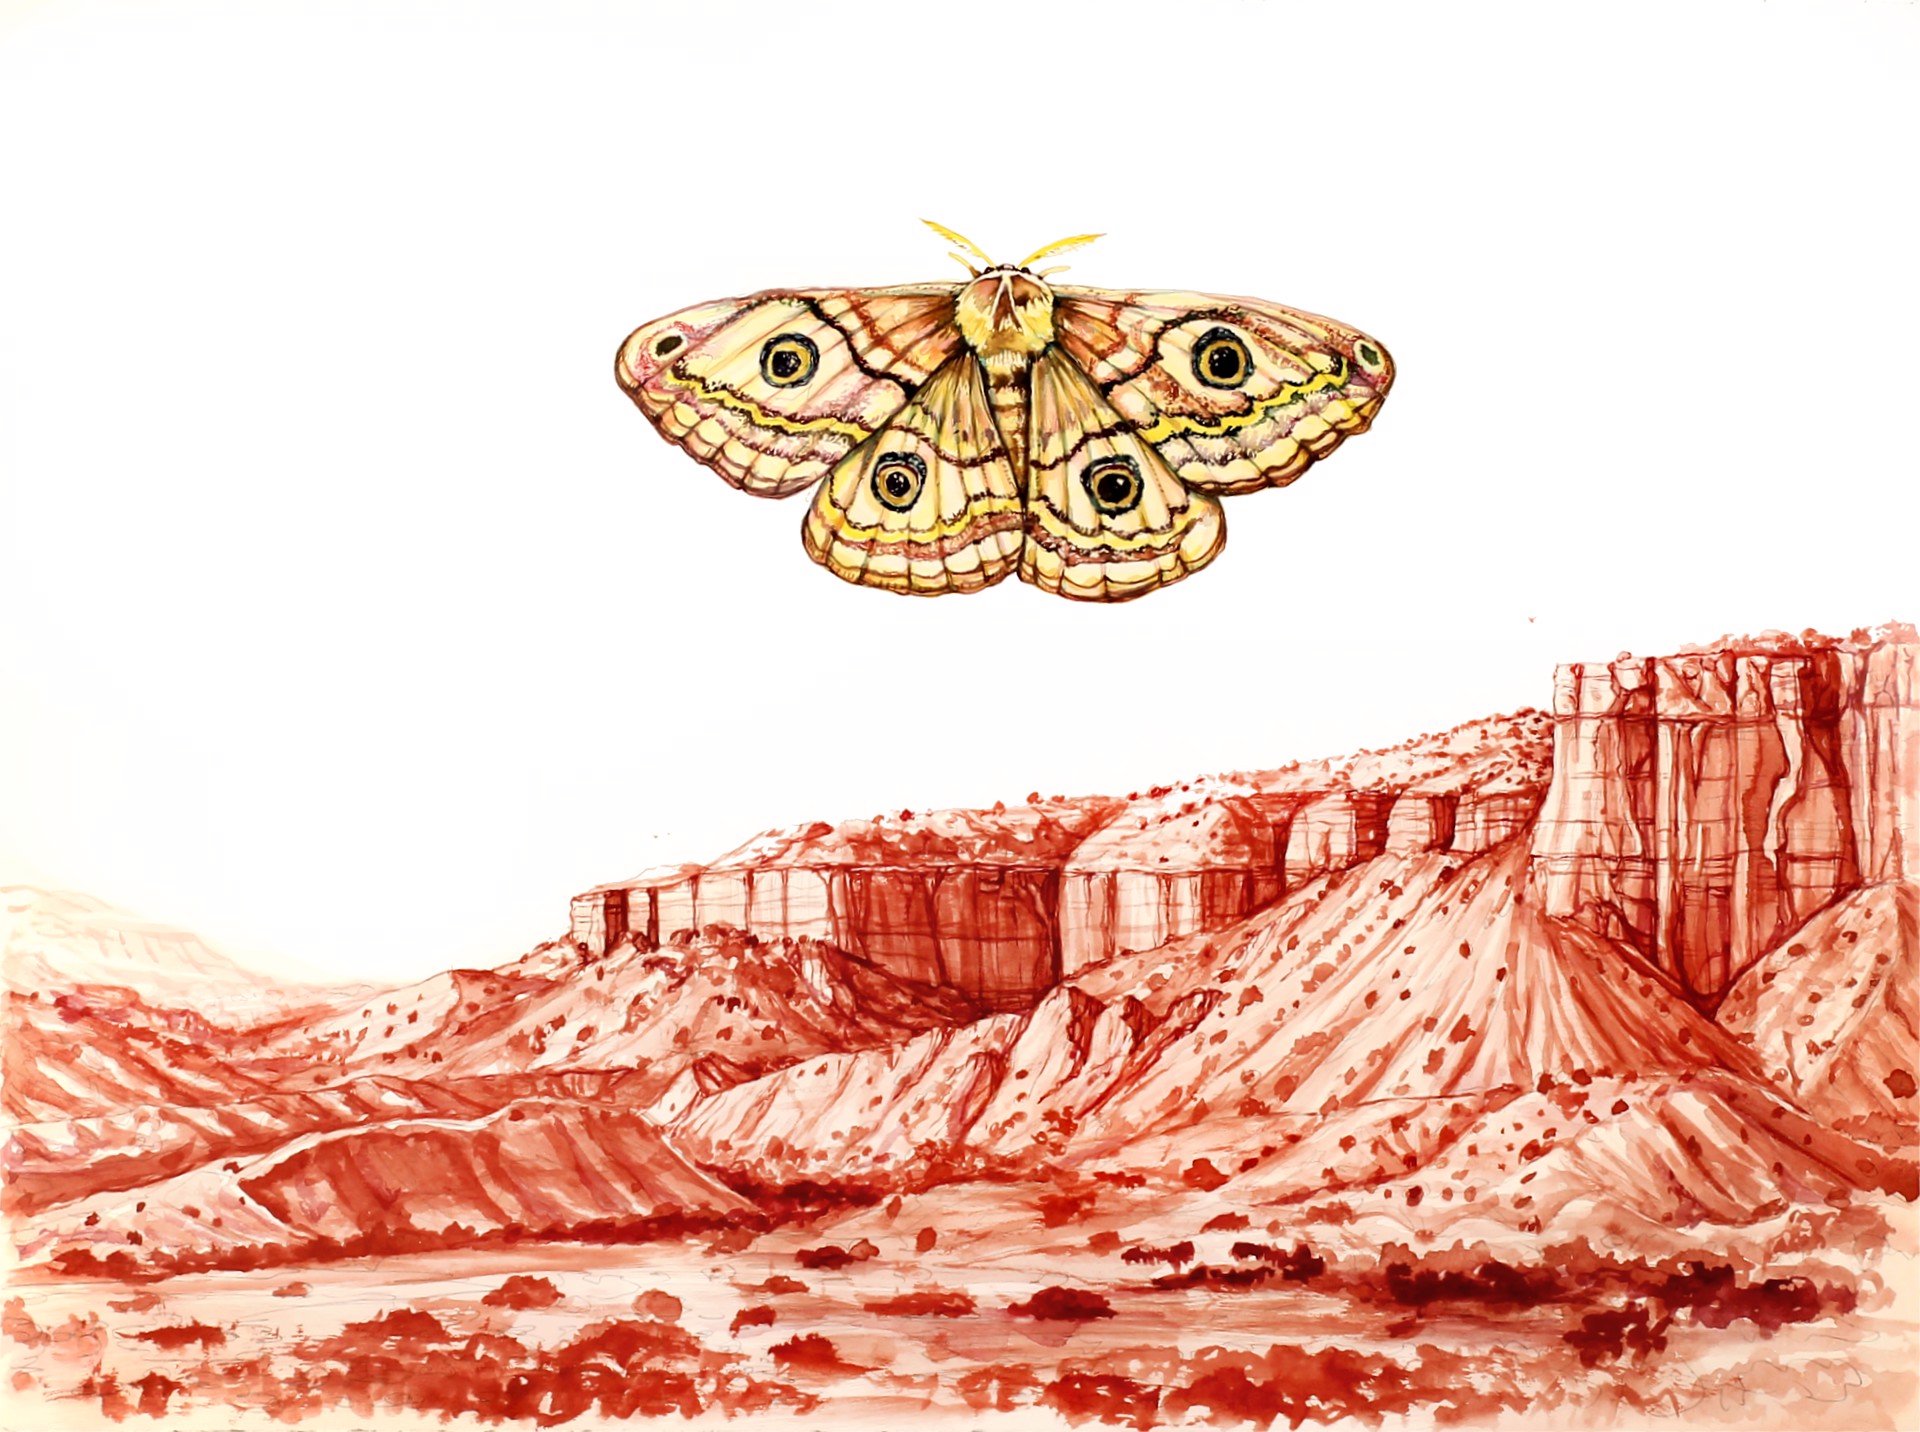 Vision Moth Over Abiquiu by Todd Ryan White